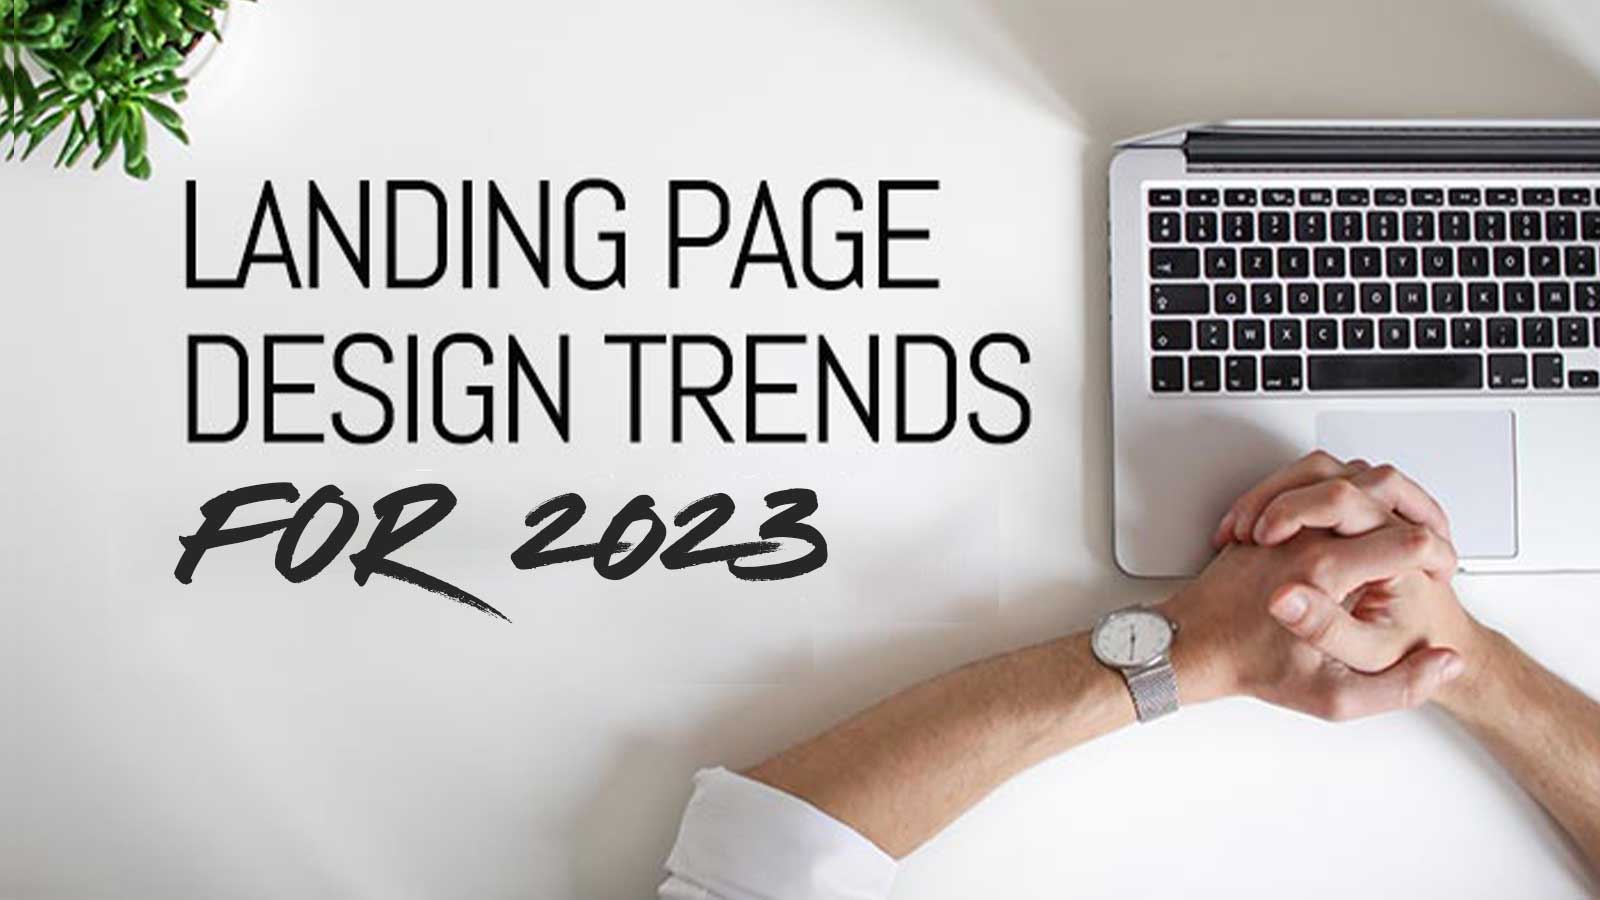 10 Best Landing Page Design Trends that will Crush it in 2023